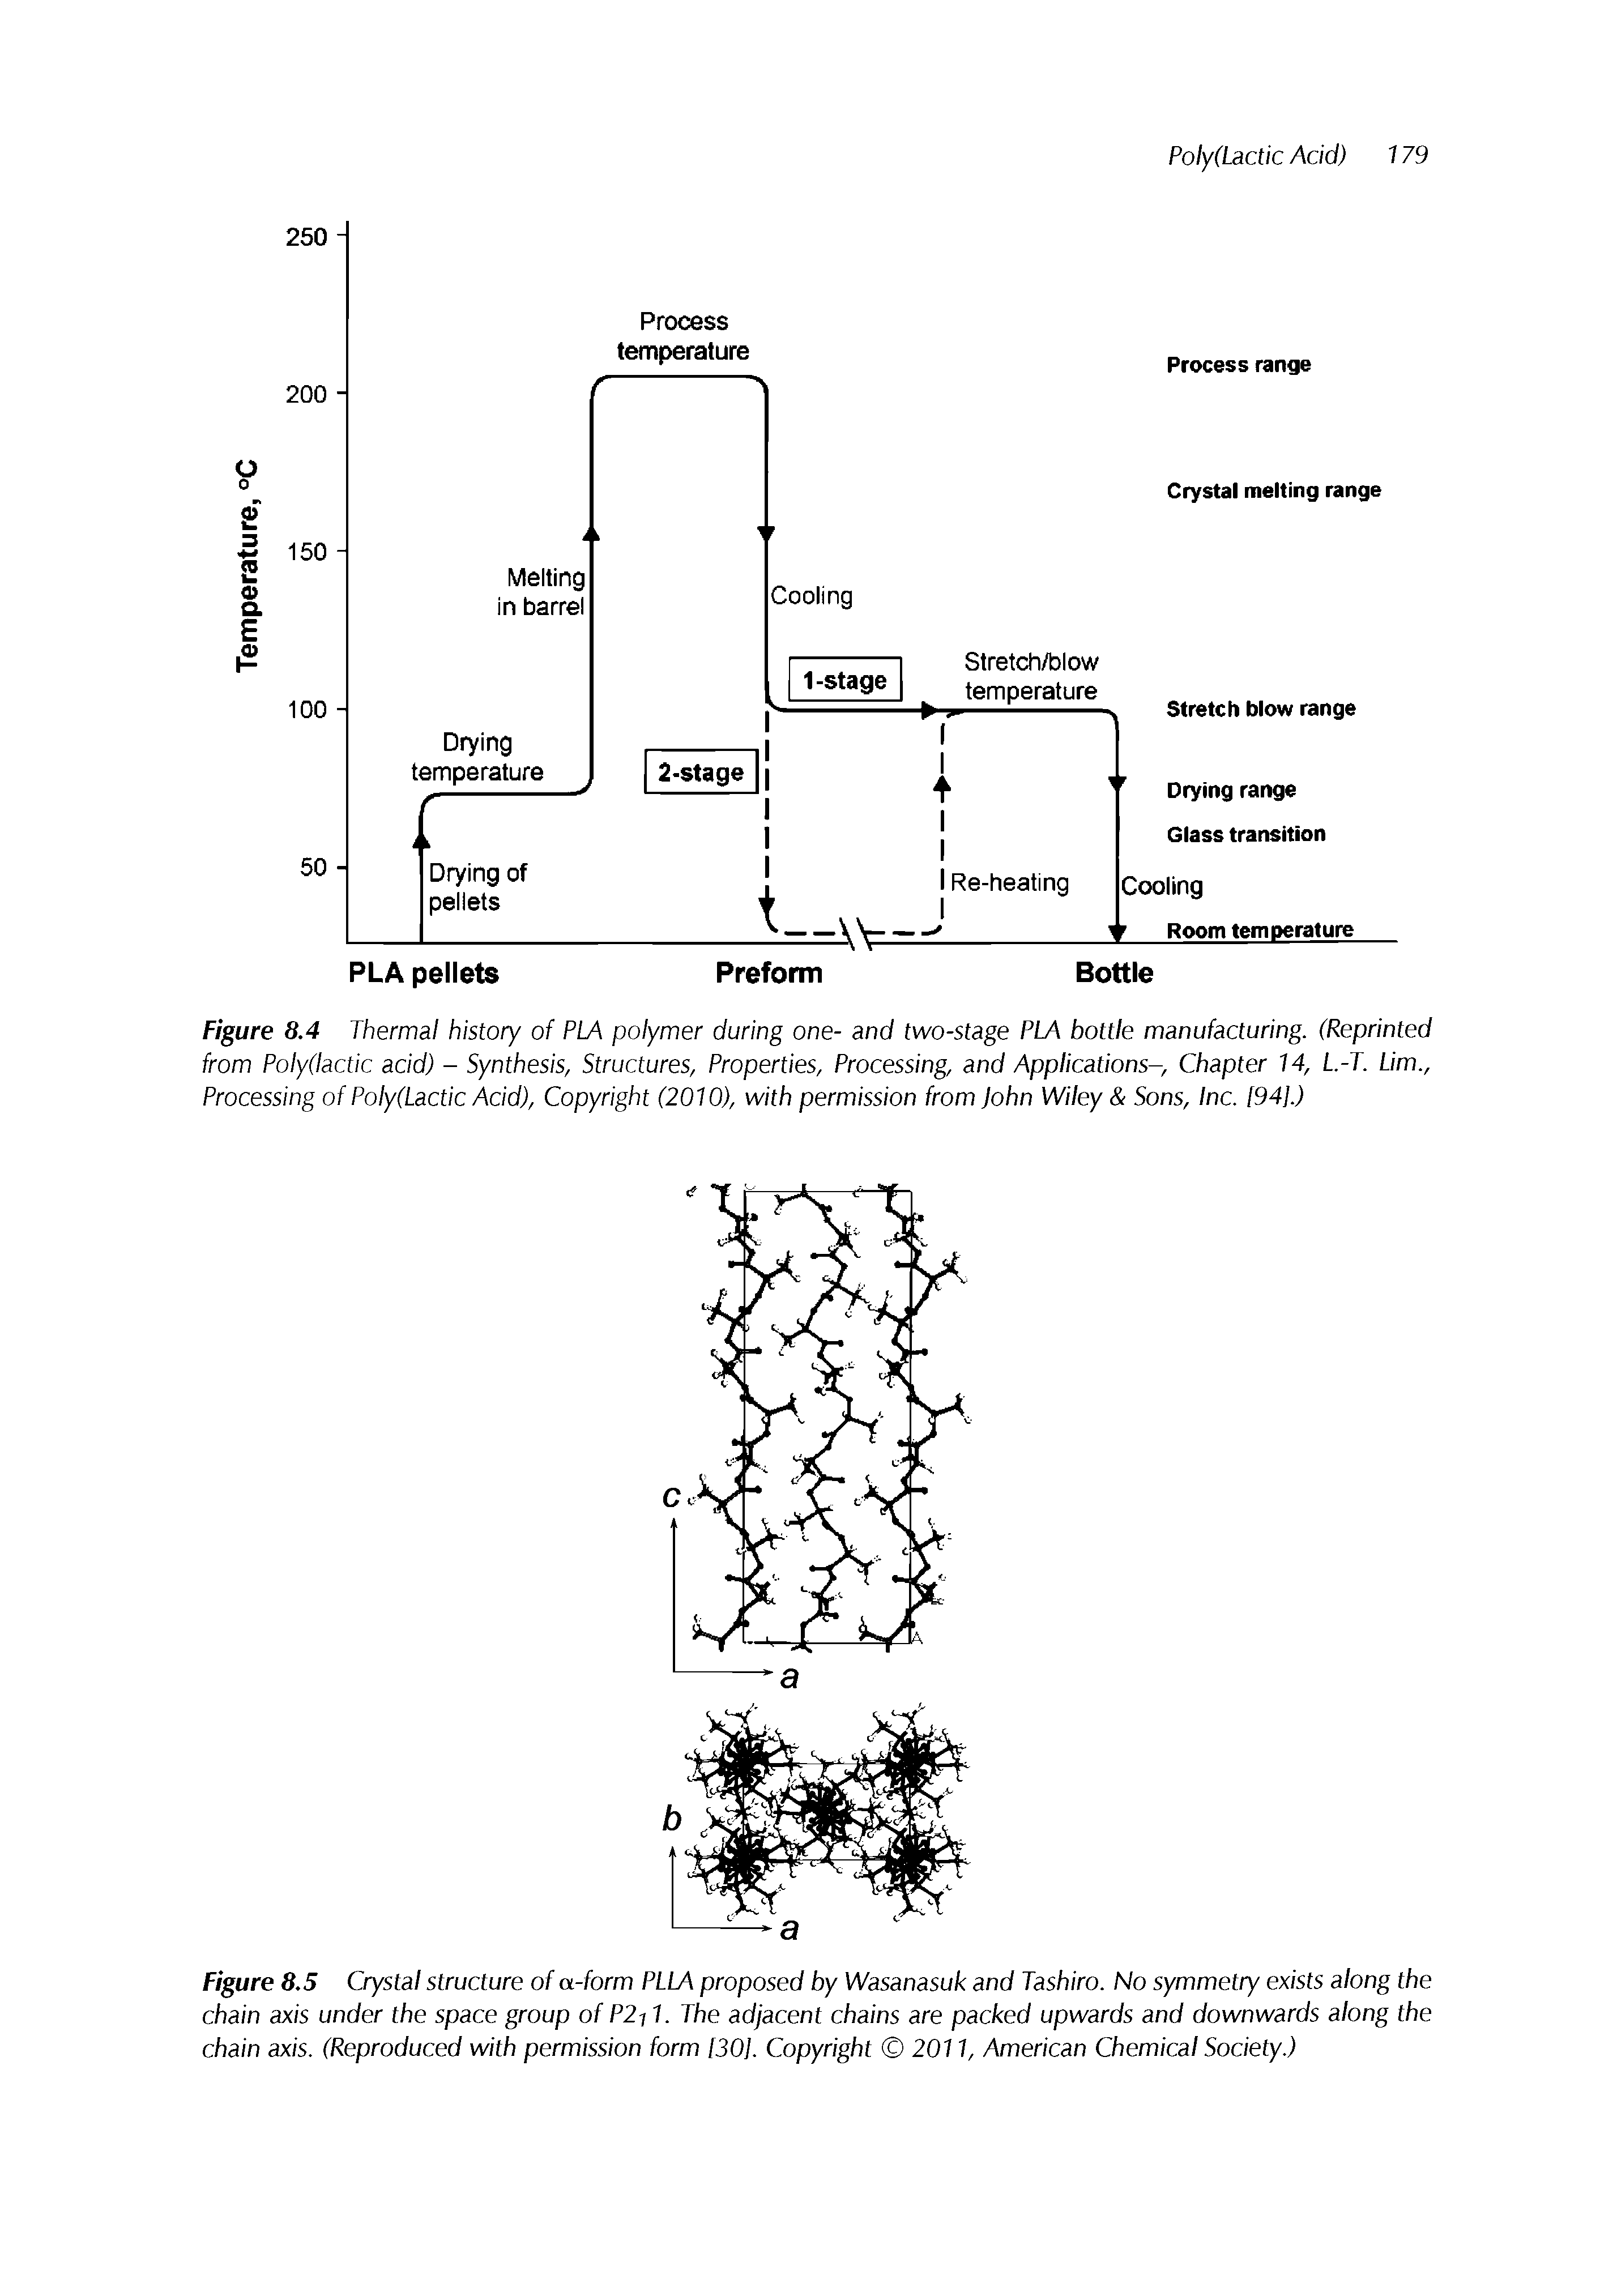 Figure 8.4 Thermal history of PLA polymer during one- and two-stage PLA bottle manufacturing. (Reprinted from Polydactic acid) - Synthesis, Structures, Properties, Processing, and Applications-, Chapter 14, L.-T. Urn., Processing of Polydactic Acid), Copyright (2010), with permission from John Wiley Sons, Inc. [94J.)...